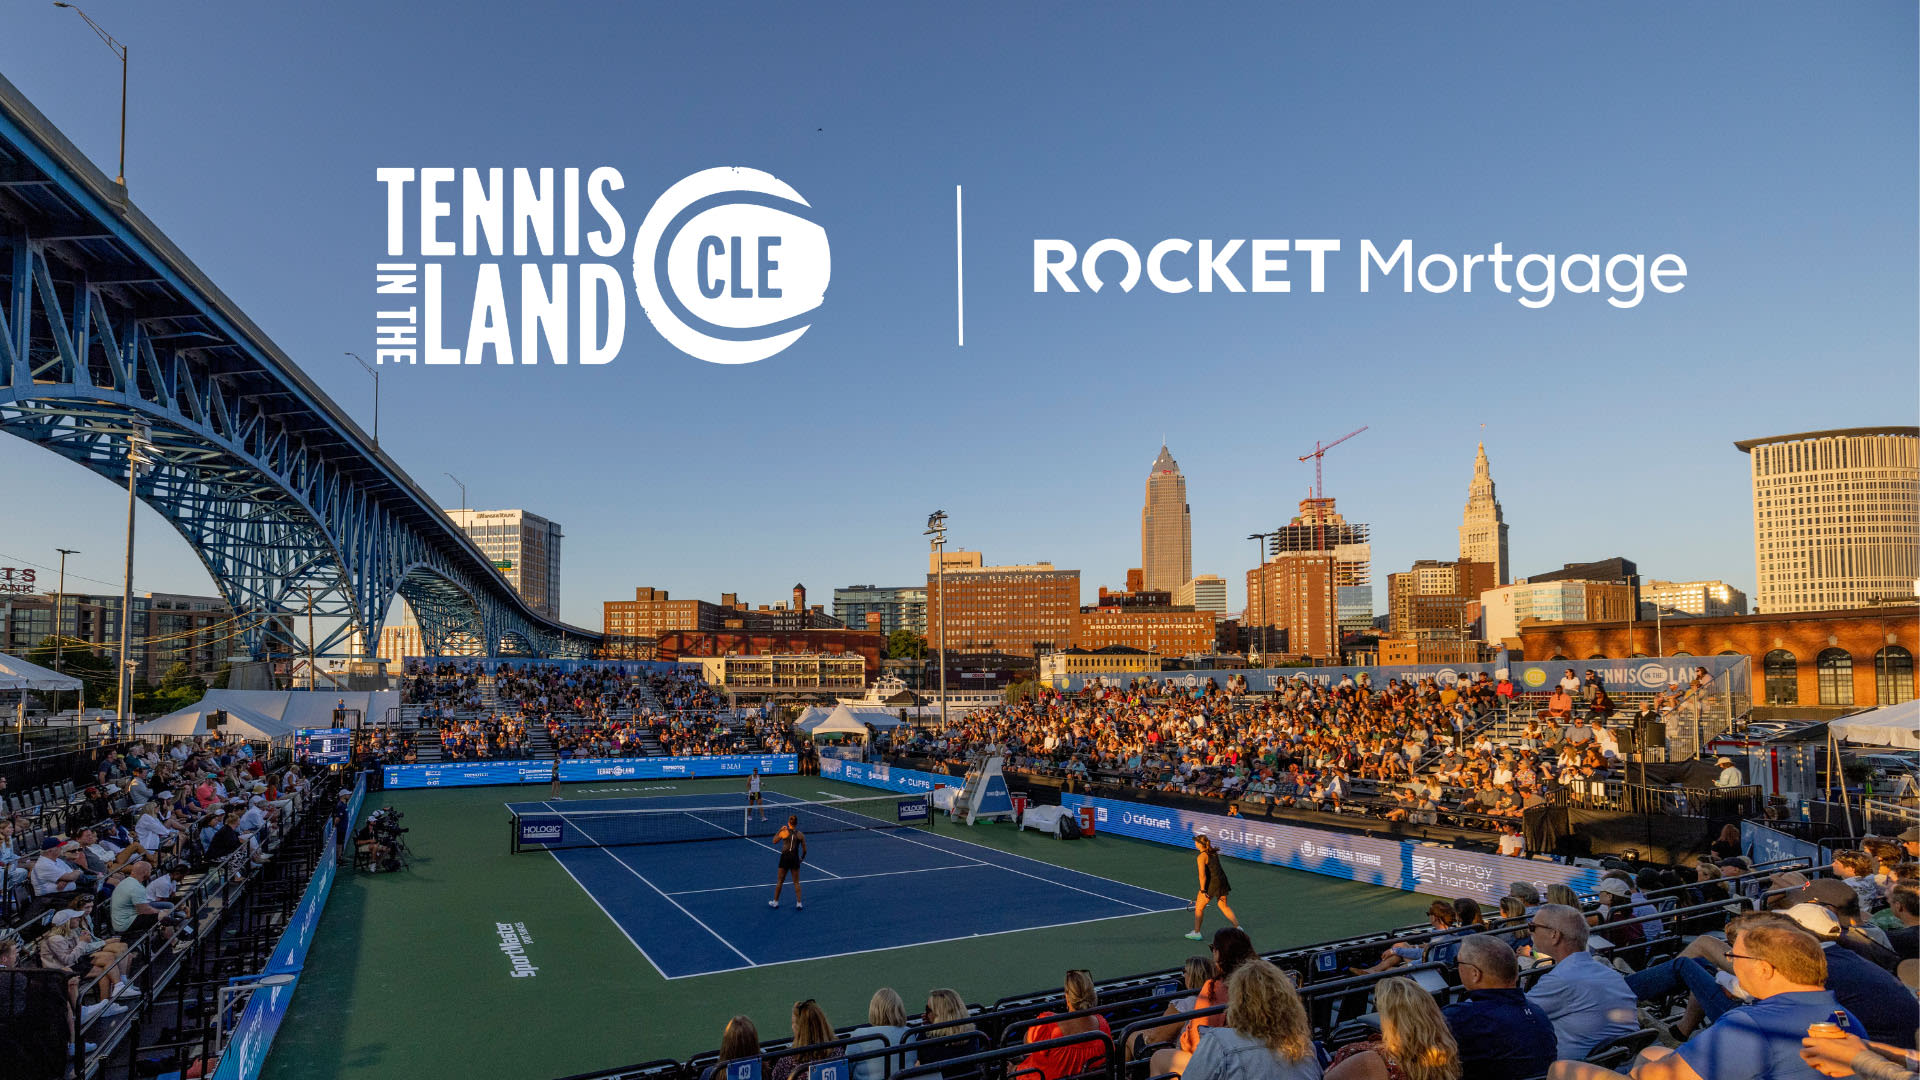 Rocket Mortgage to be presenting sponsor of Cleveland WTA tournament